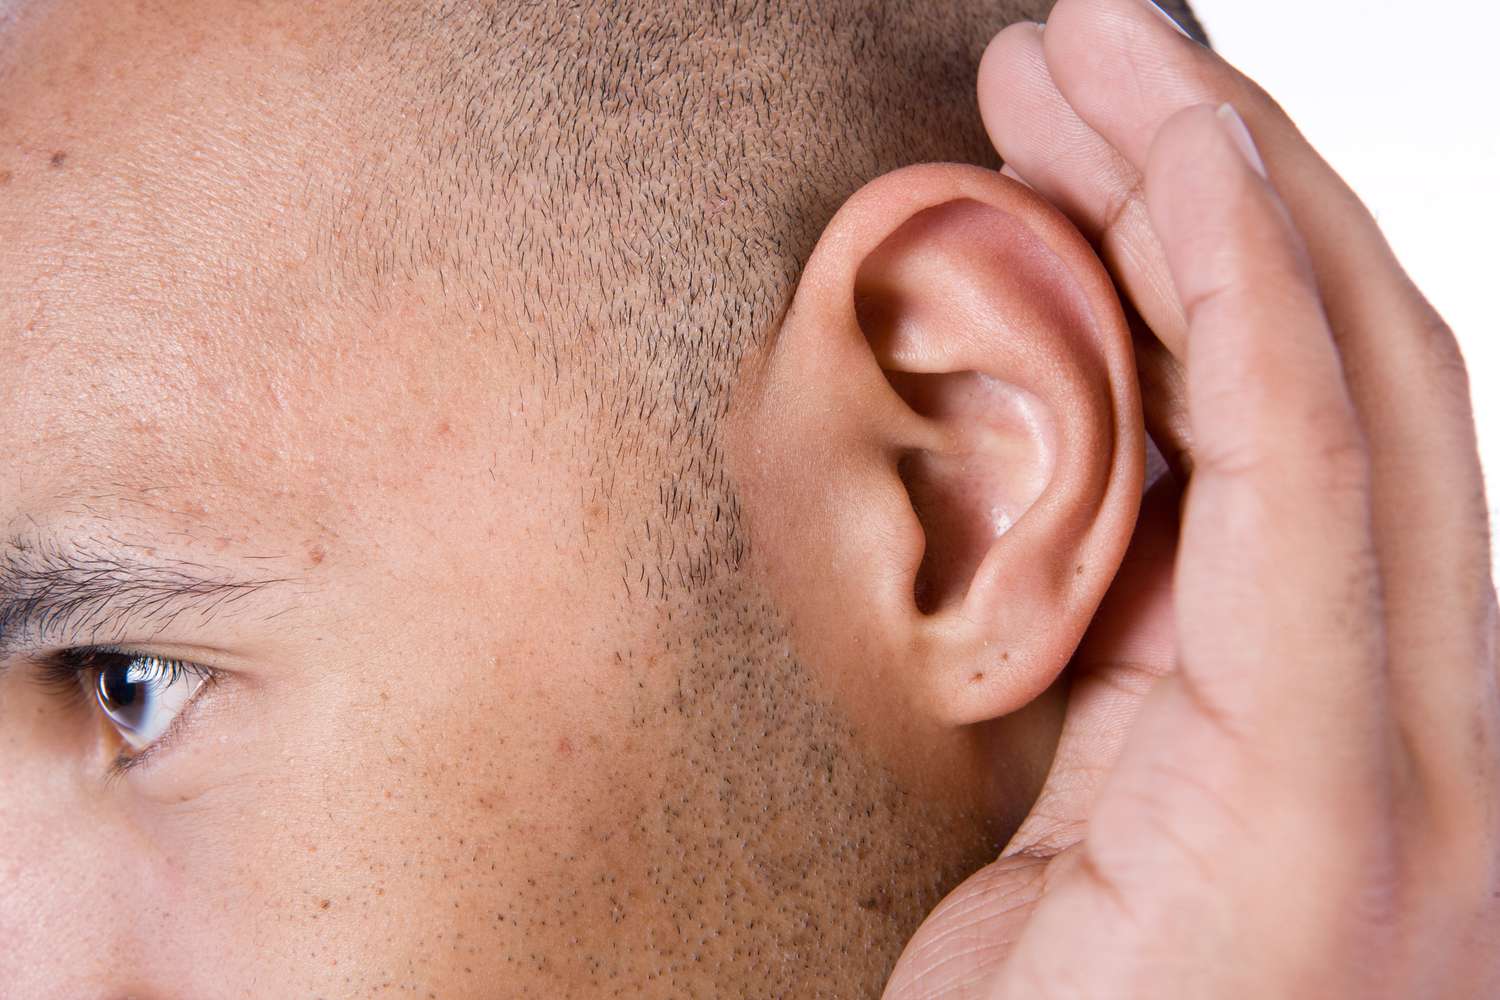 Which Structure Of The External Ear Collects Sound Waves?